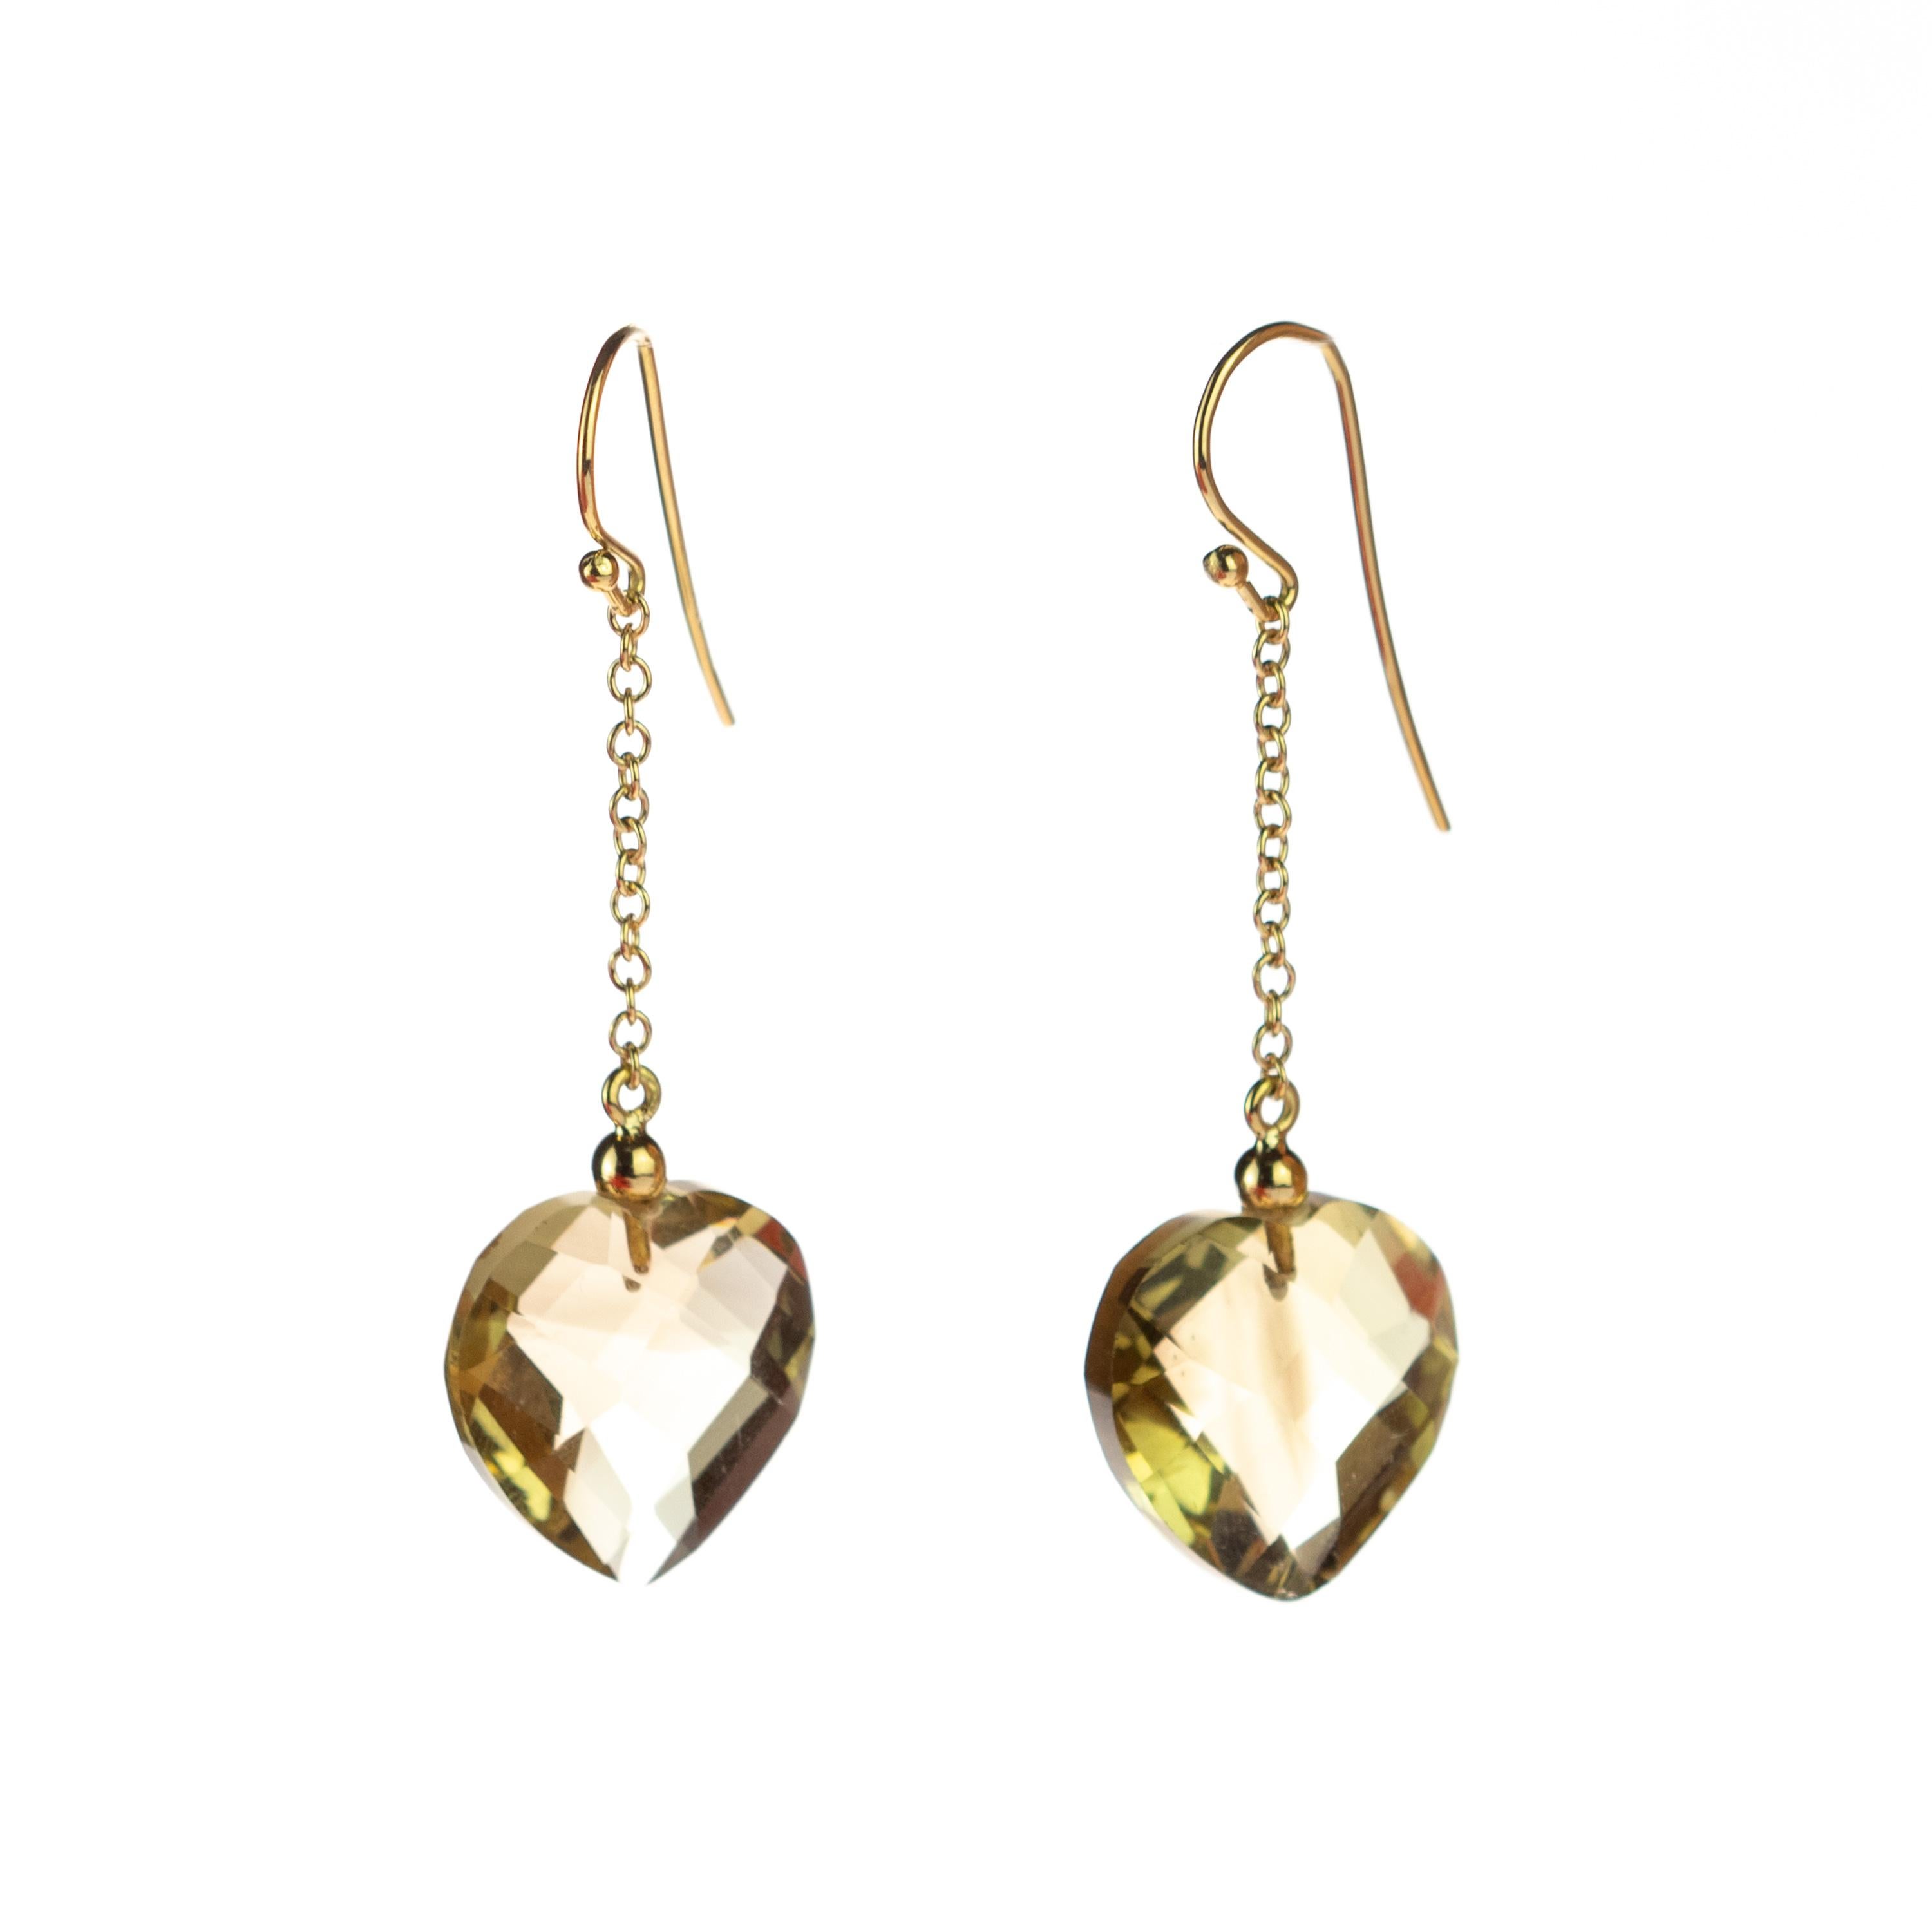 Take love with you everywhere! These breathtaking Citrine Lemon Quartz earrings have a sweet design and the most precious stones. These drop dangle earrings are the perfect glamorous jewelry for a daily occasion. A 18 karat yellow long delicate